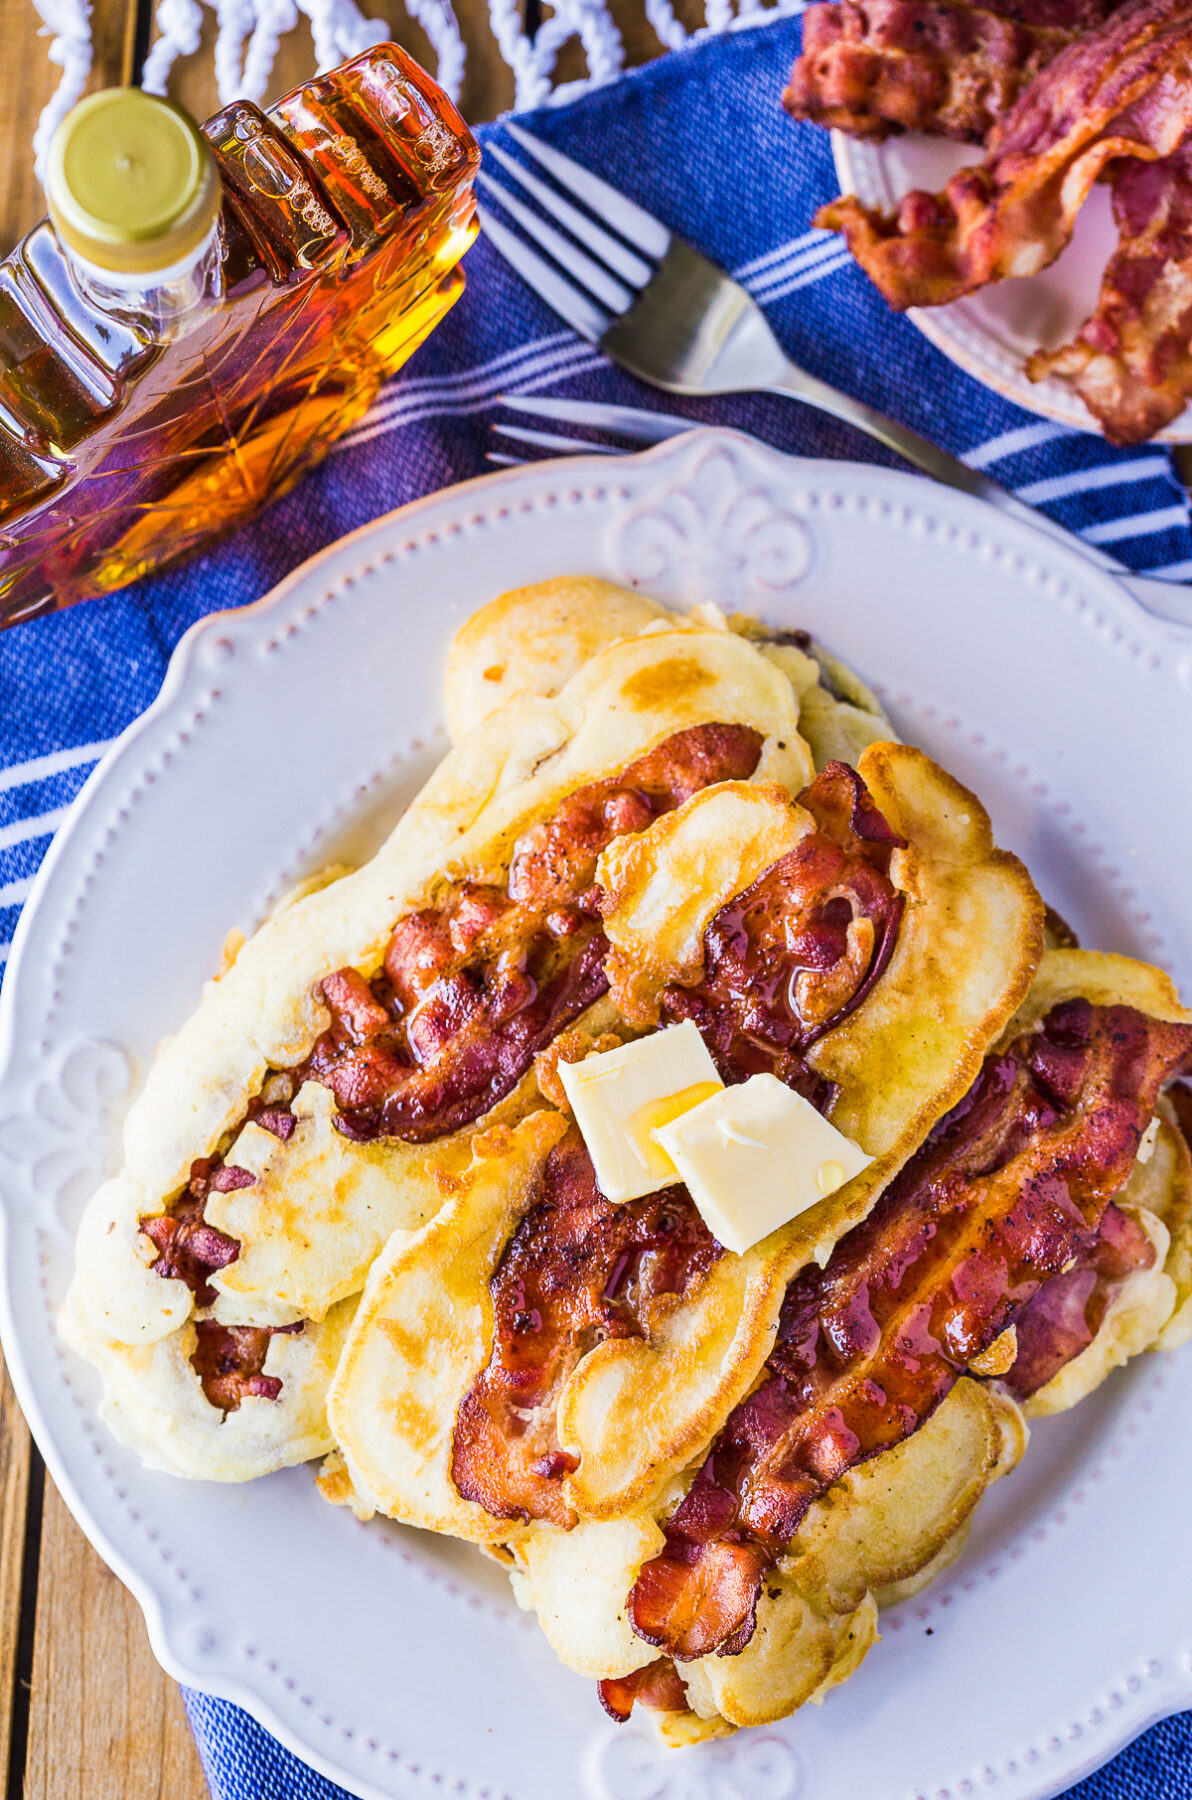 Fluffy, sweet and salty bacon pancakes. This bacon pancake recipe is great for breakfast on a lazy weekend for the family!